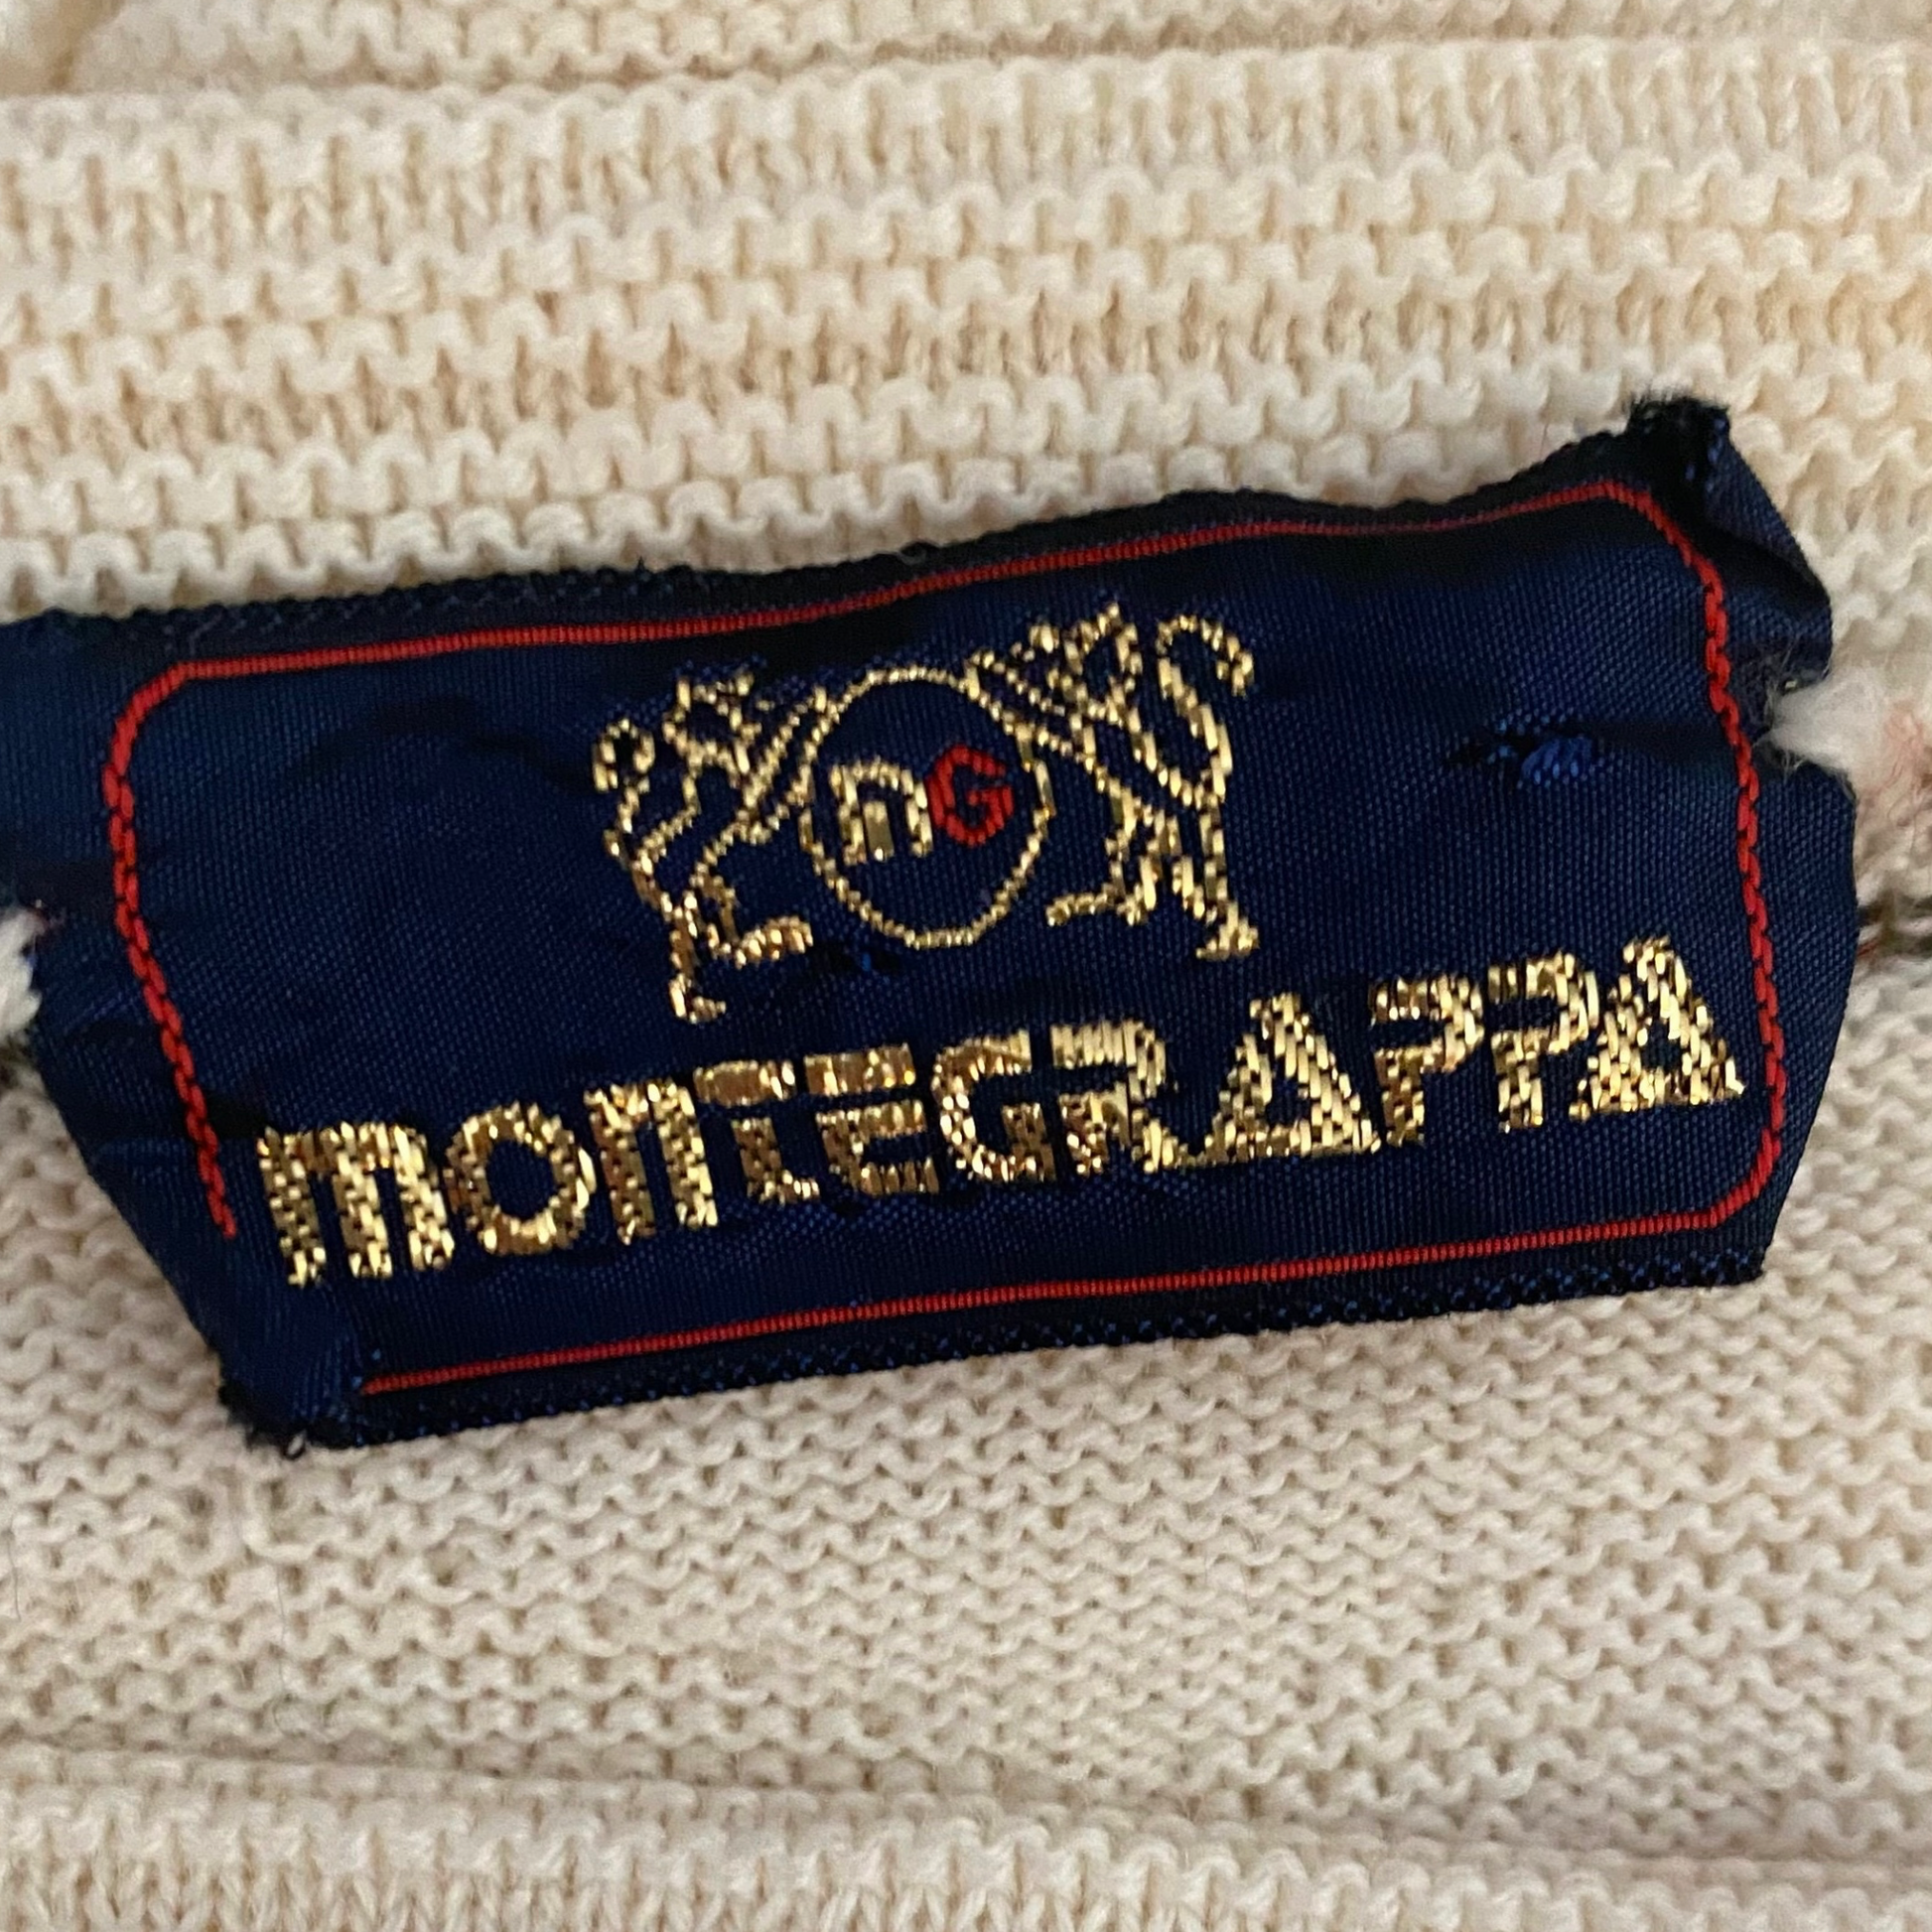 Elegant 70s Montegrappa label sweater - Pair with flares for a retro look